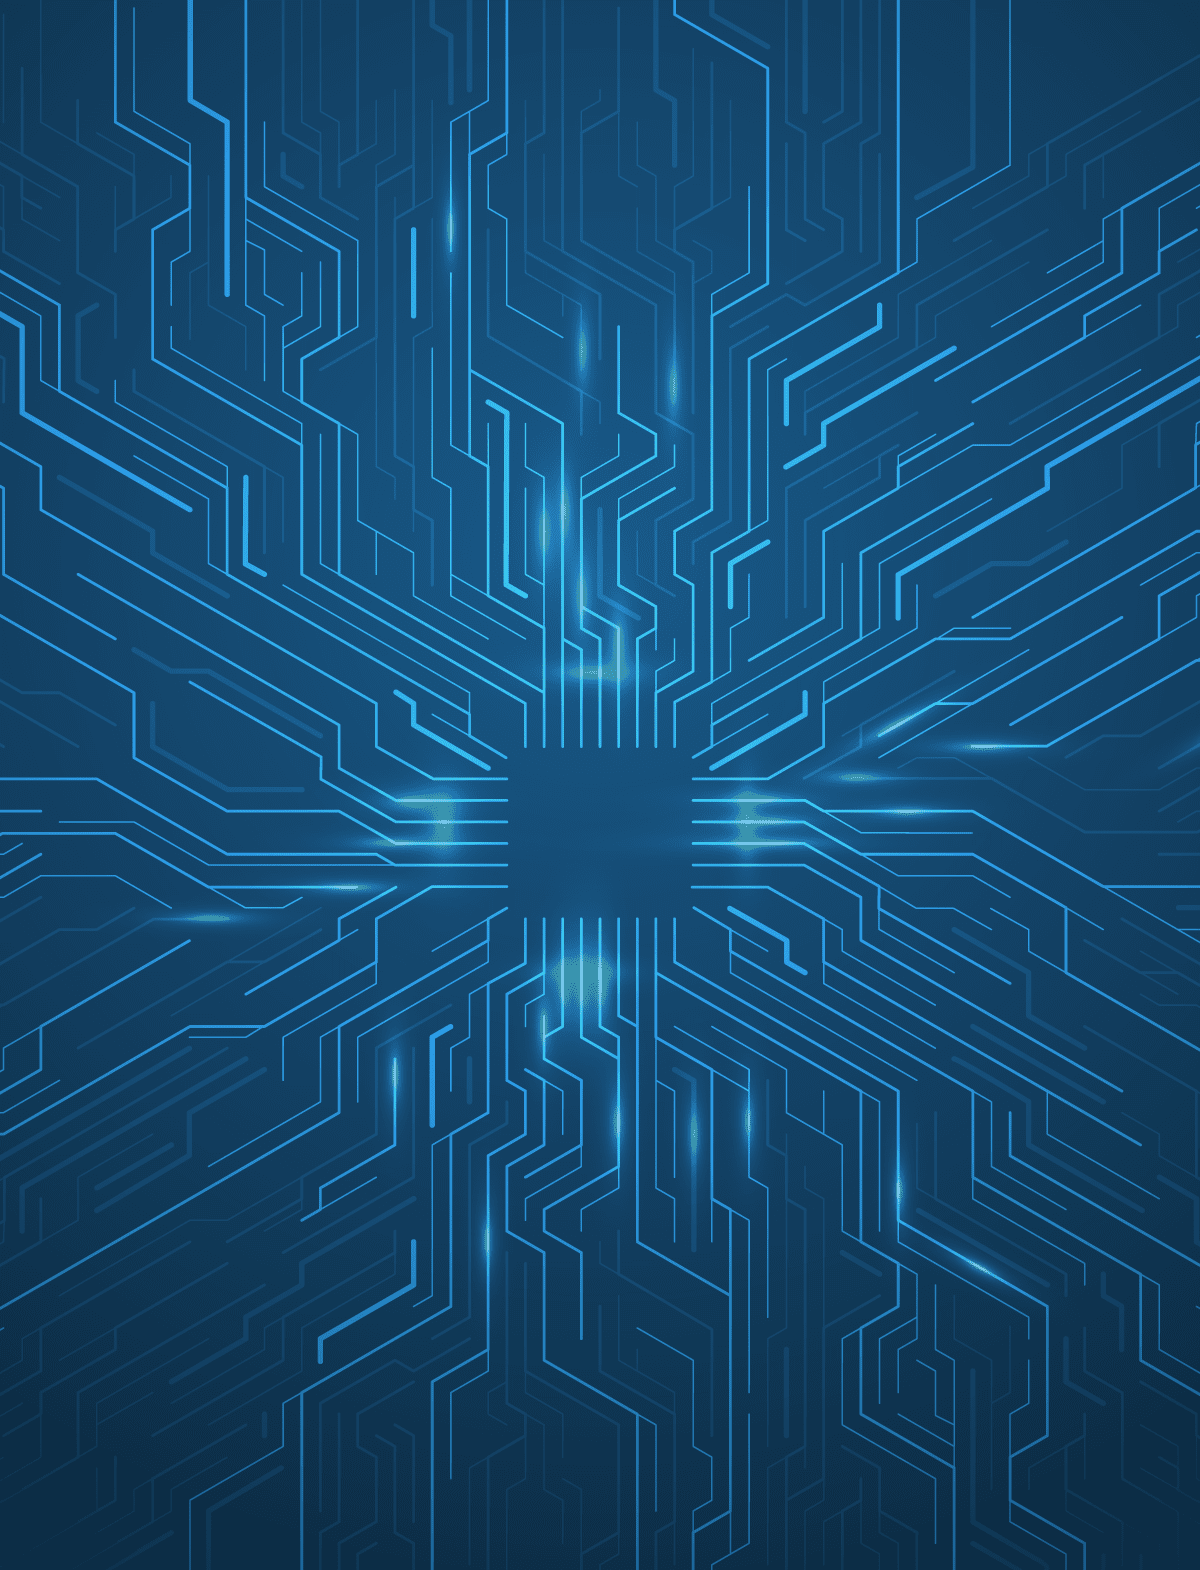 This illustration shows thin pale blue lines on a darker blue background. The lines make a pattern that hints at a circuit board. The illustration elicits a sense of abstract high-tech related to computer circuitry and connectivity. This image relates to content about the AML software and GRC software solutions of AML Partners and its RegTechONE platform for AML software.